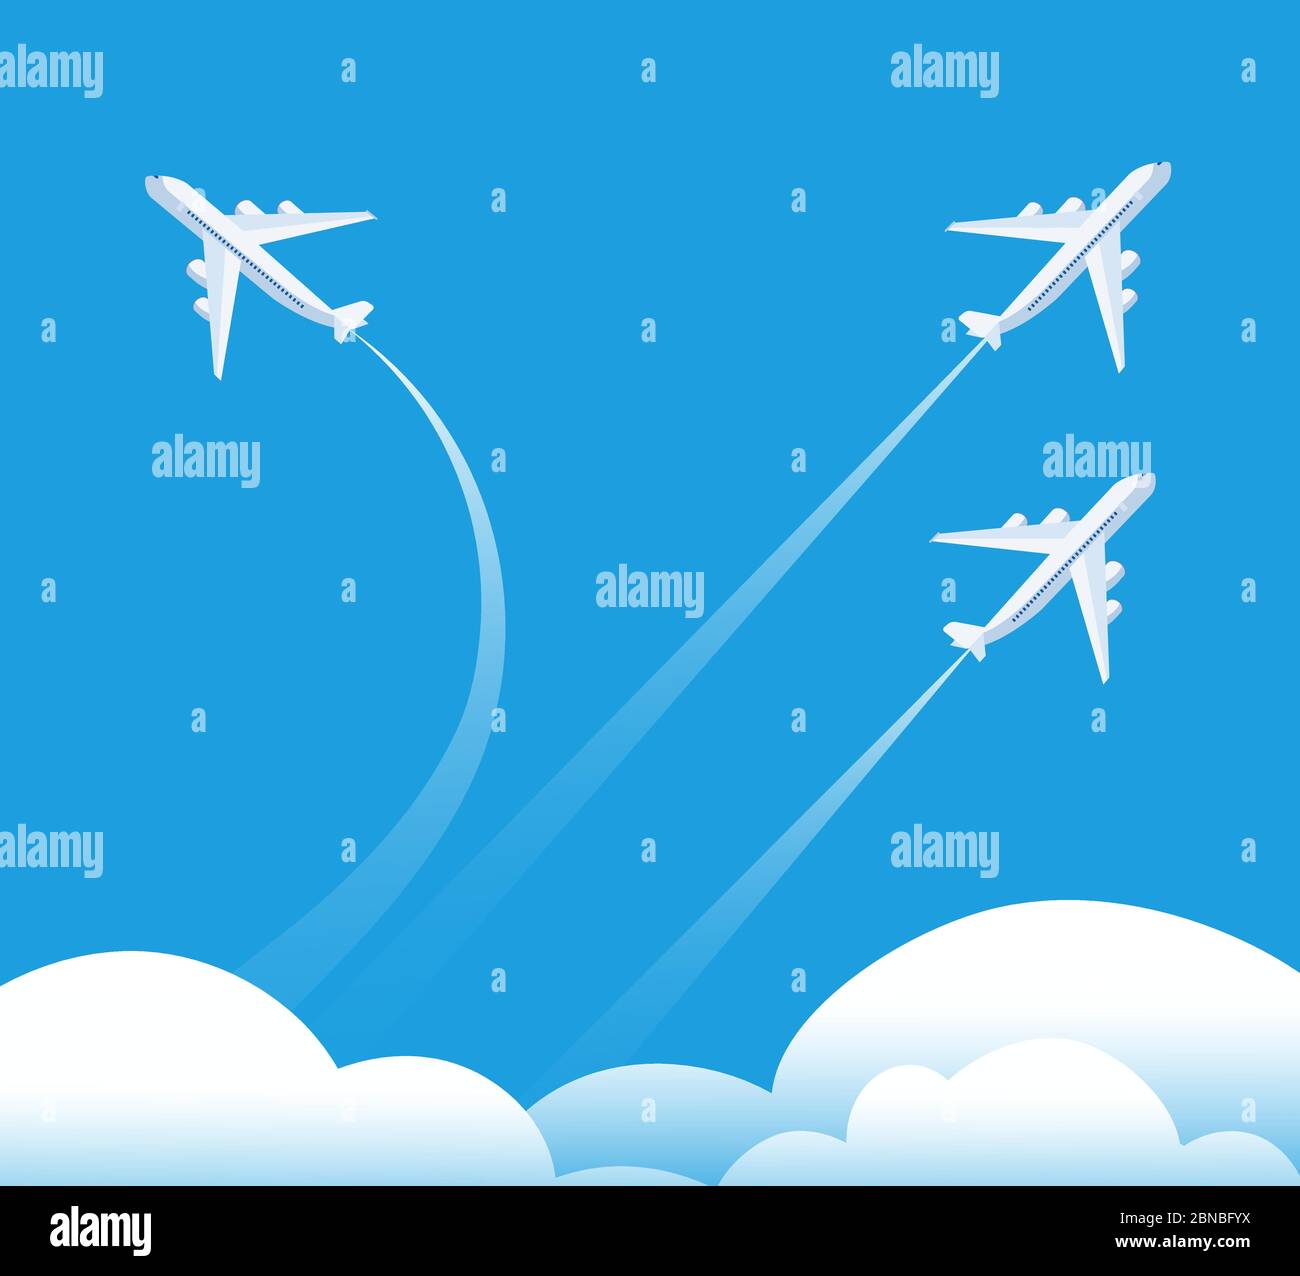 Changing direction concept. Airplane flying in different direction. New trend, unique idea and innovation way business background. Illustration of airplane way direction, creative strategy solution Stock Vector